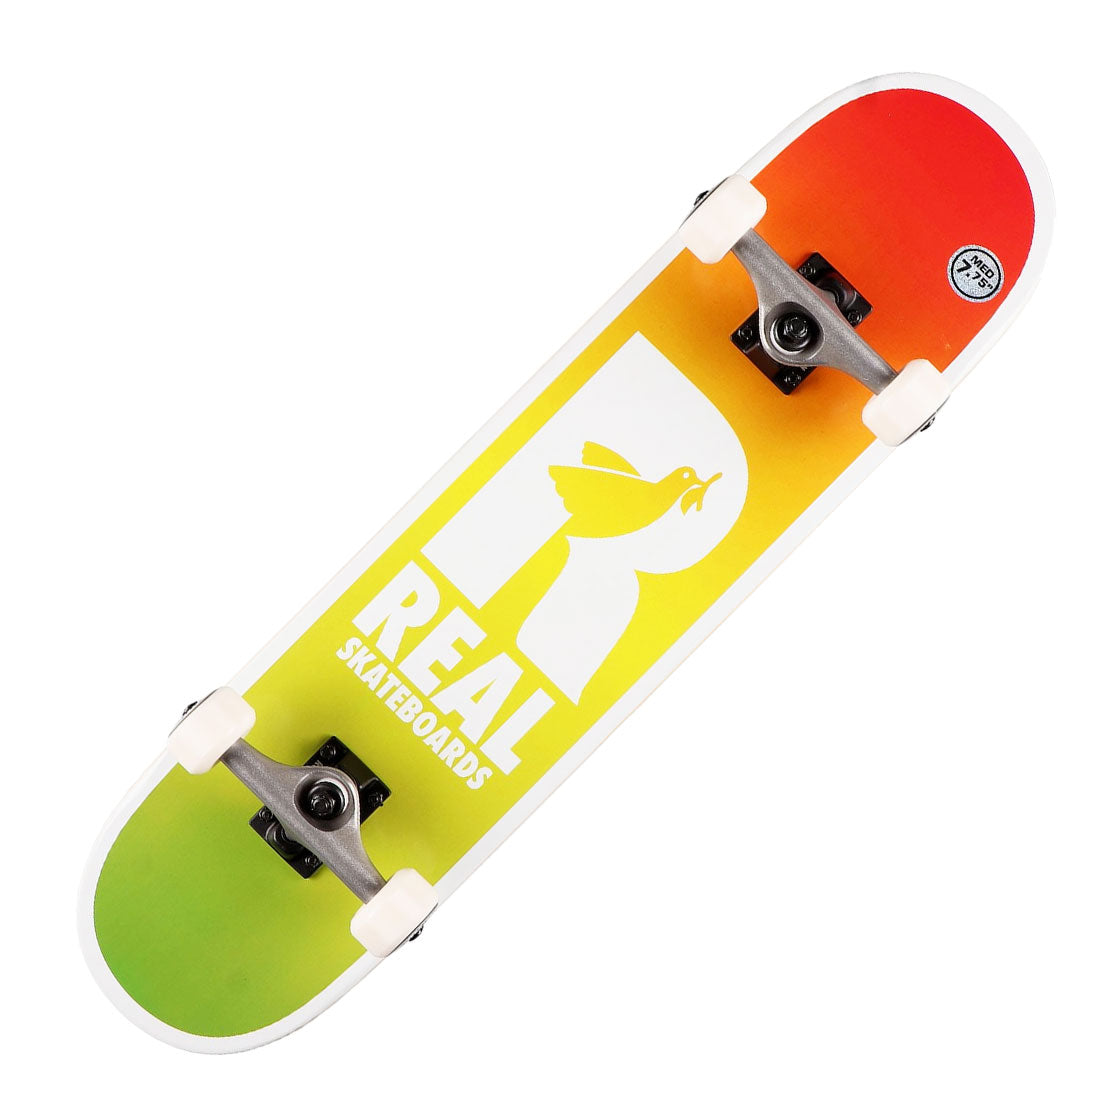 Real Be Free Fade 7.75 Complete Skateboard Completes Modern Street